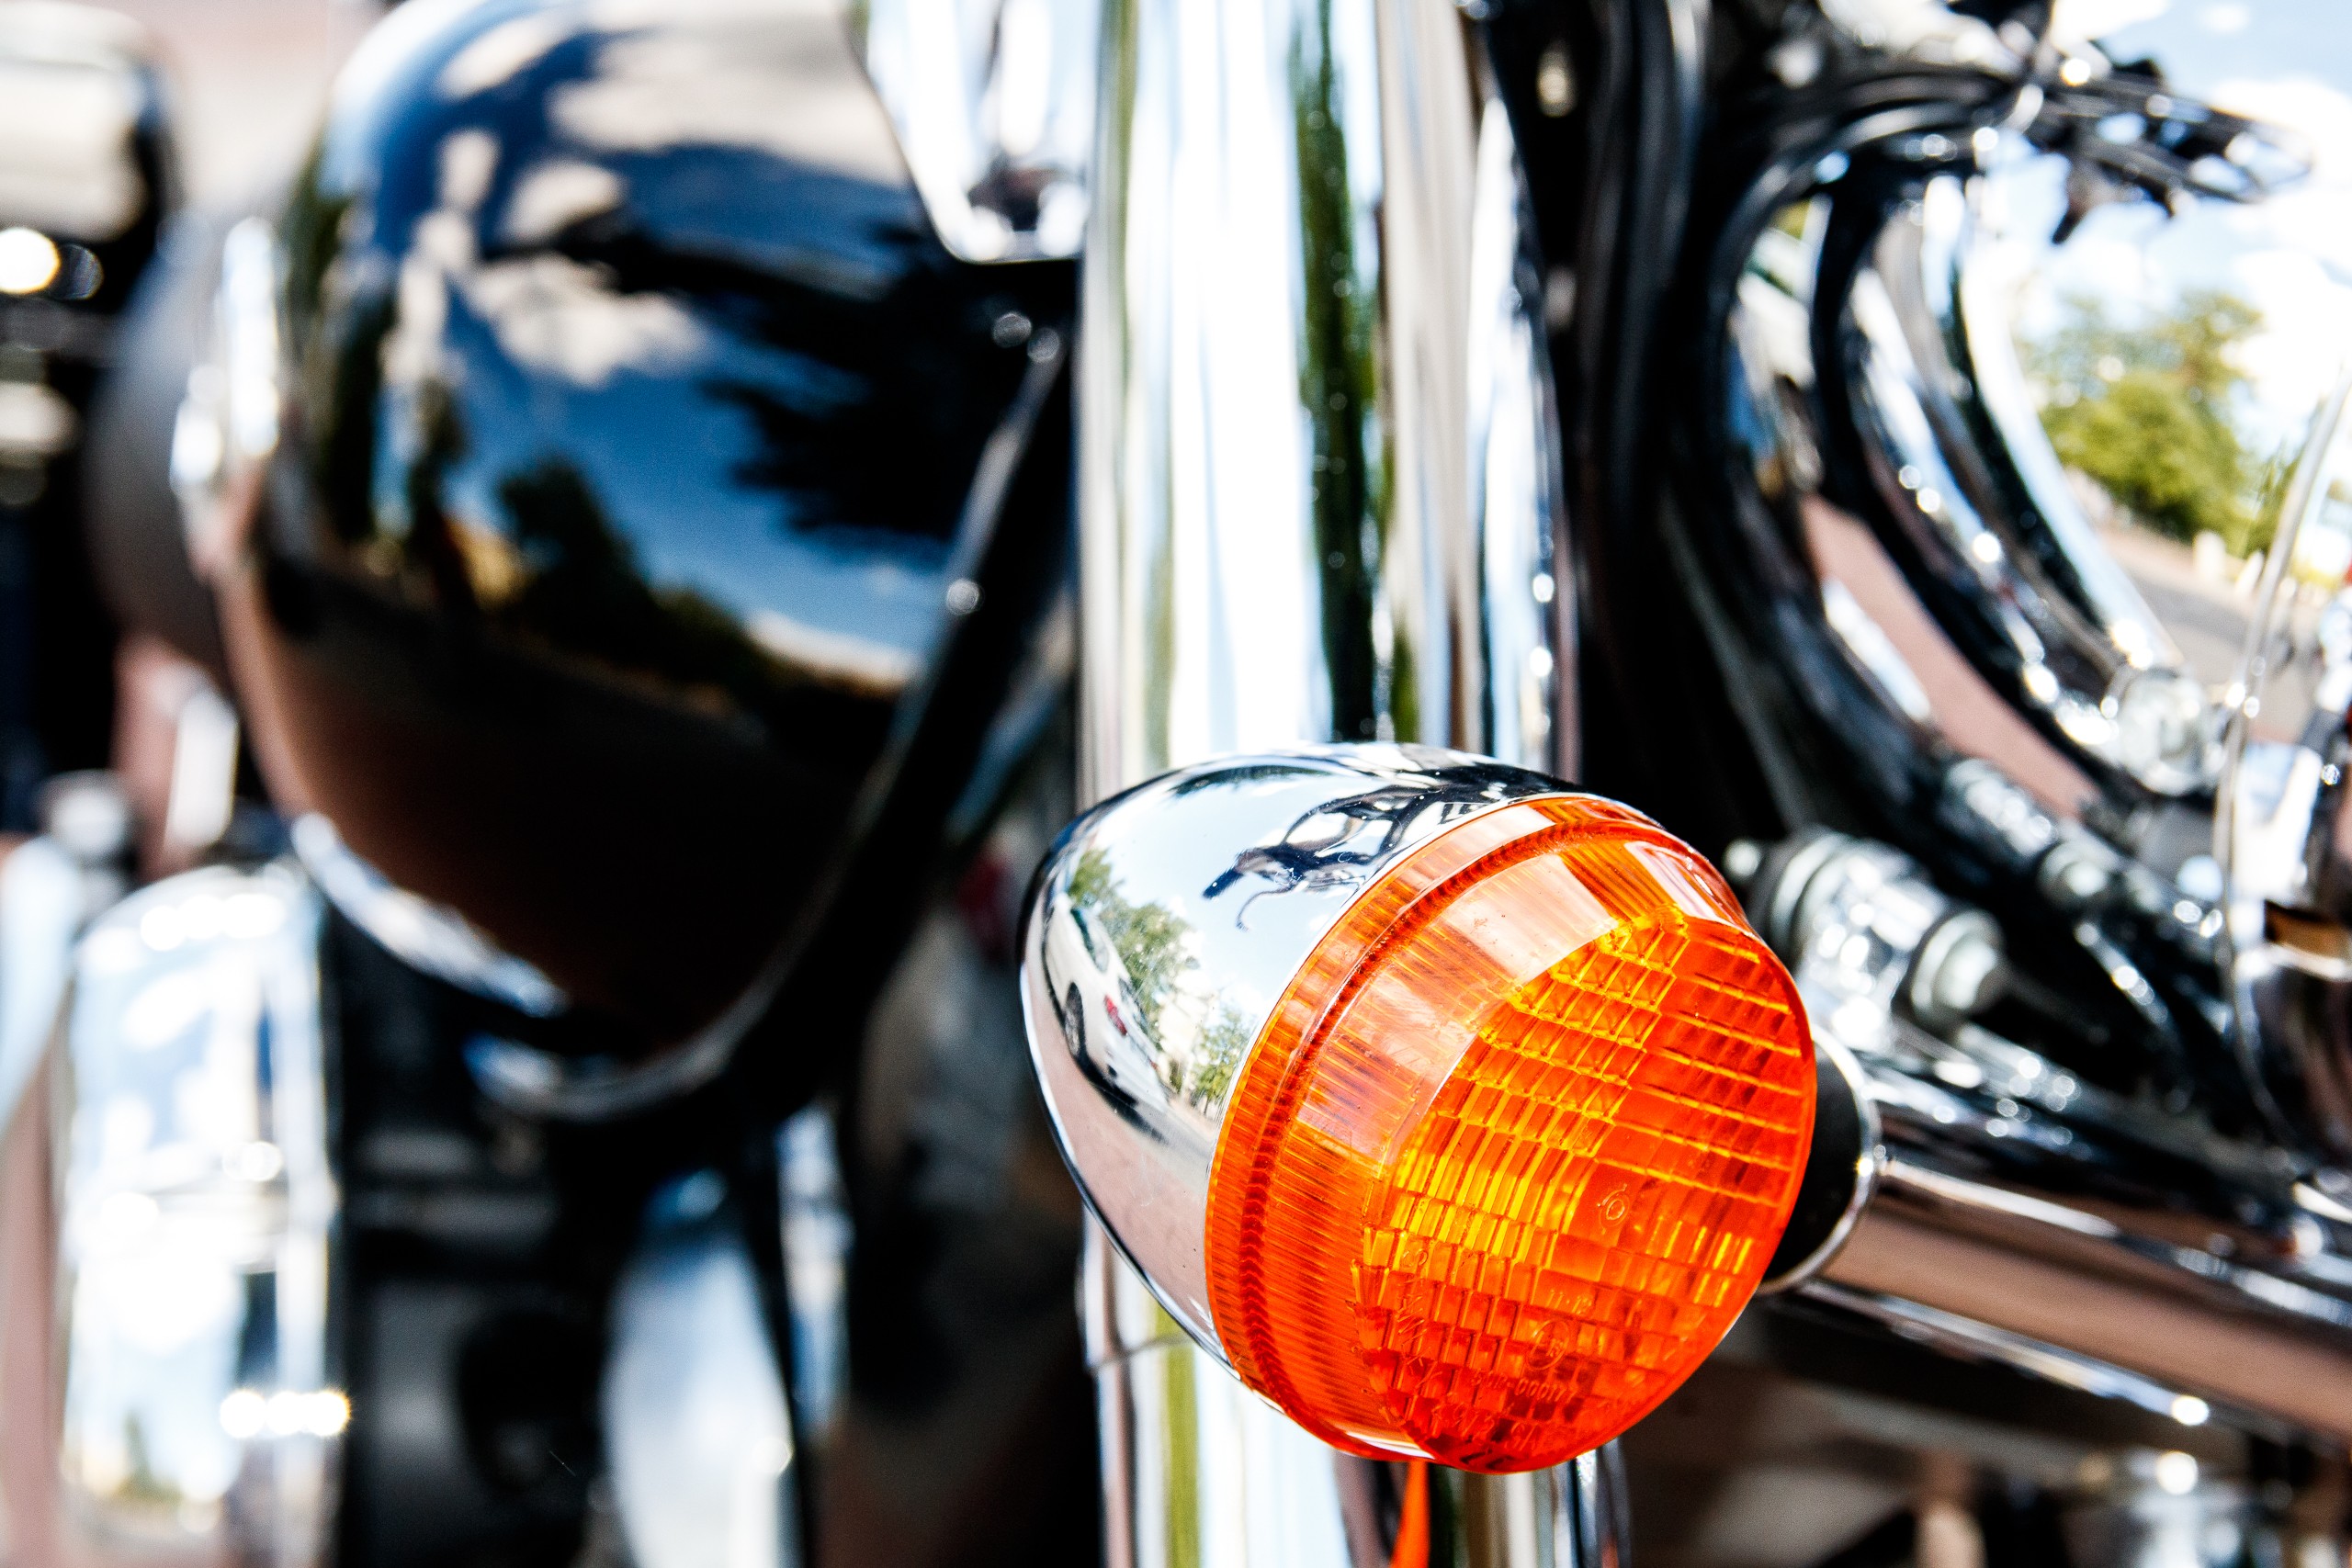 Motorcycle Light Cycle Vehicle Blurred 2560x1707